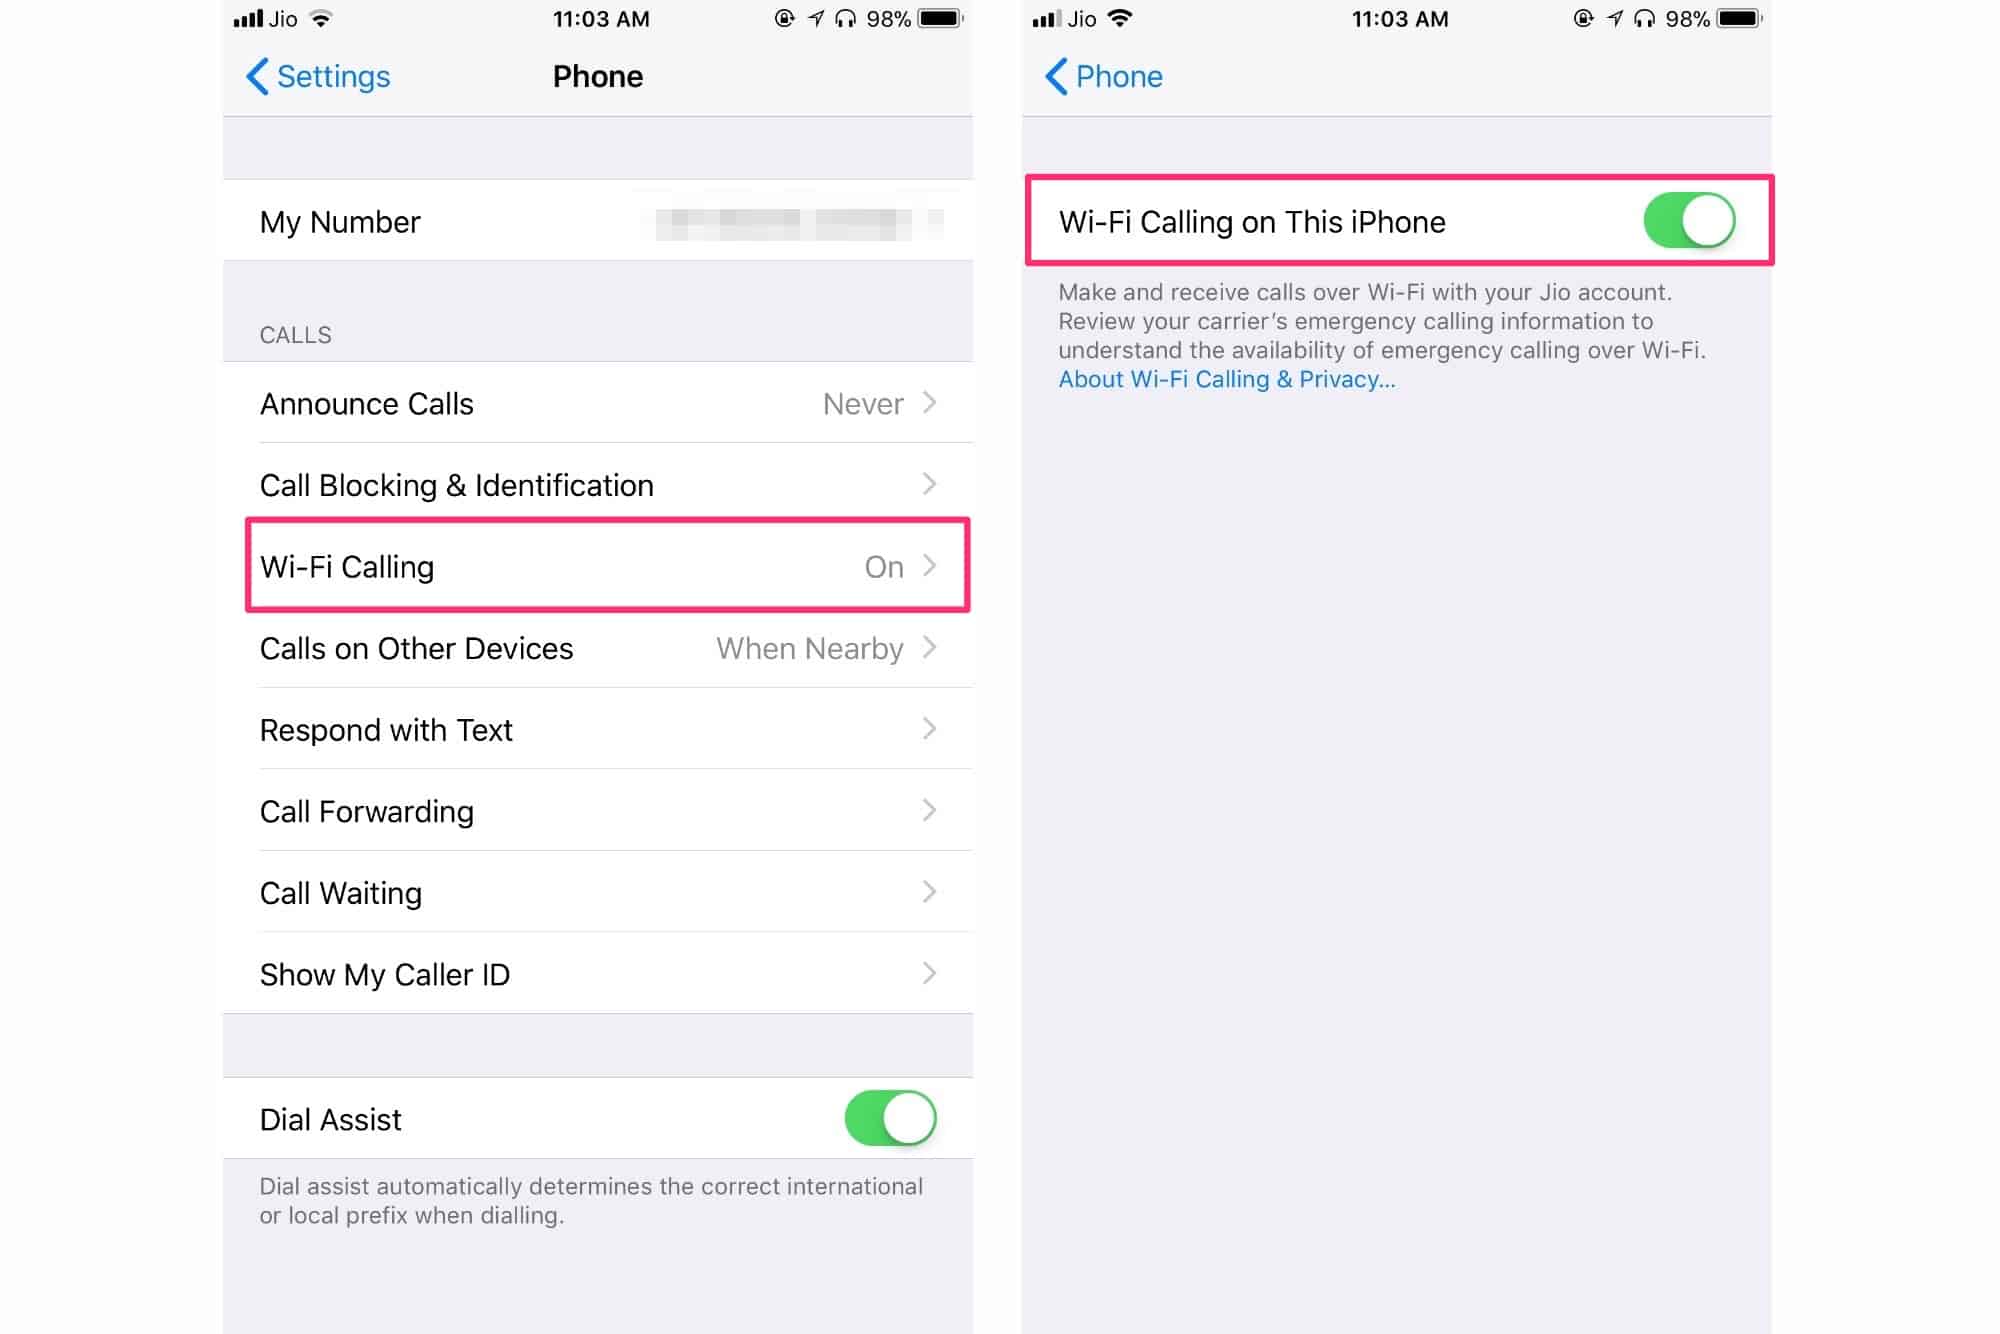 enabling-wi-fi-calling-on-your-iphone-12